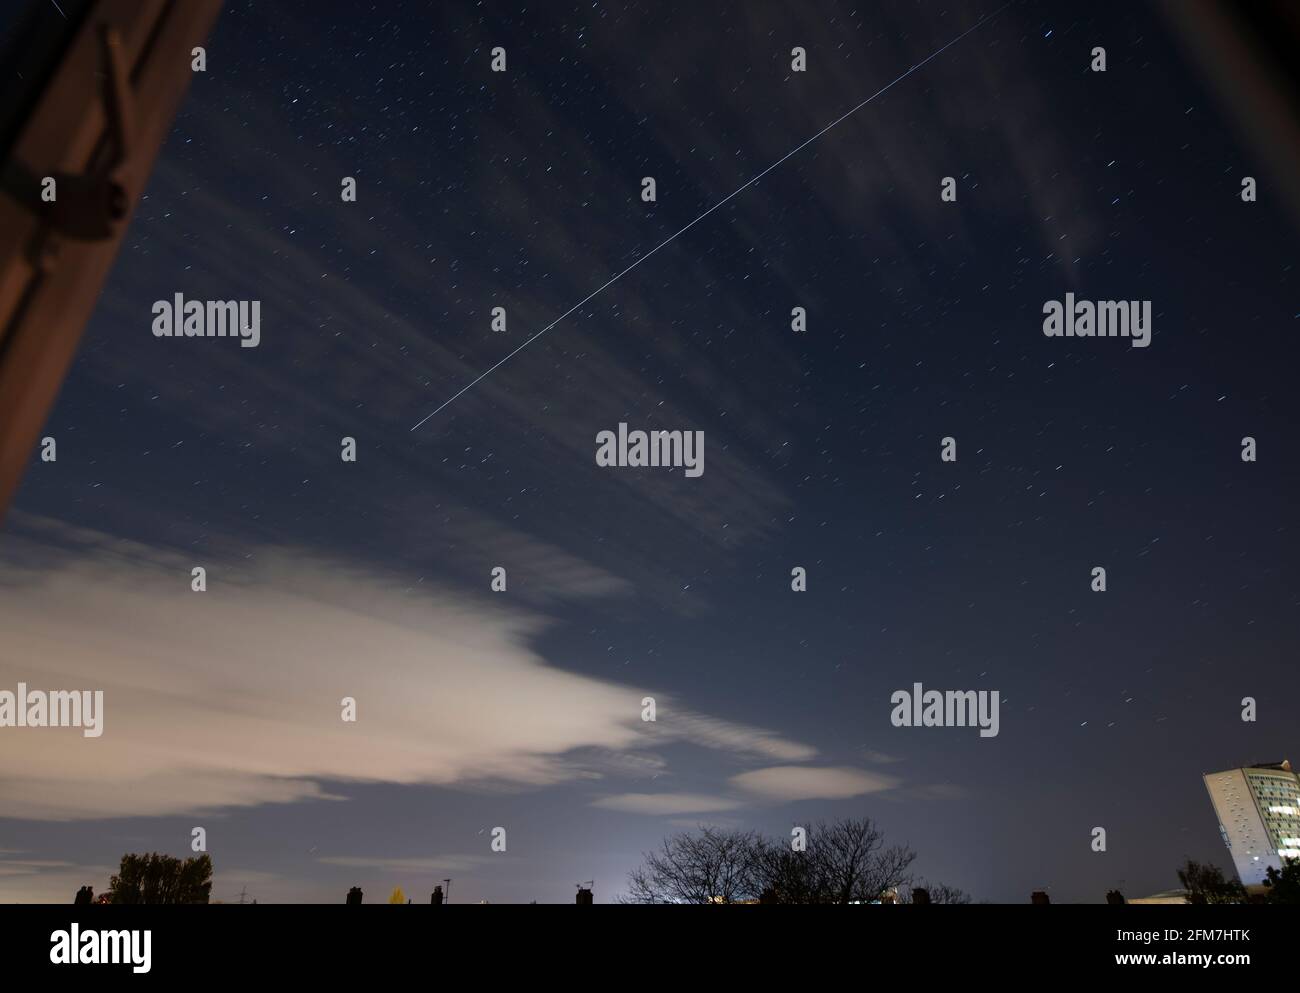 Wimbledon, London, UK. 7 May 2021. The Aquarids meteor shower hunt is called off in south west London as increasing cloud in the early hours of the morning builds up. The International Space Station makes a bright pass over London at 02.35am. This composite image of the ISS trail made up from multiple 8 second images and captured through an open window. Credit: Malcolm Park/Alamy Live News. Stock Photo